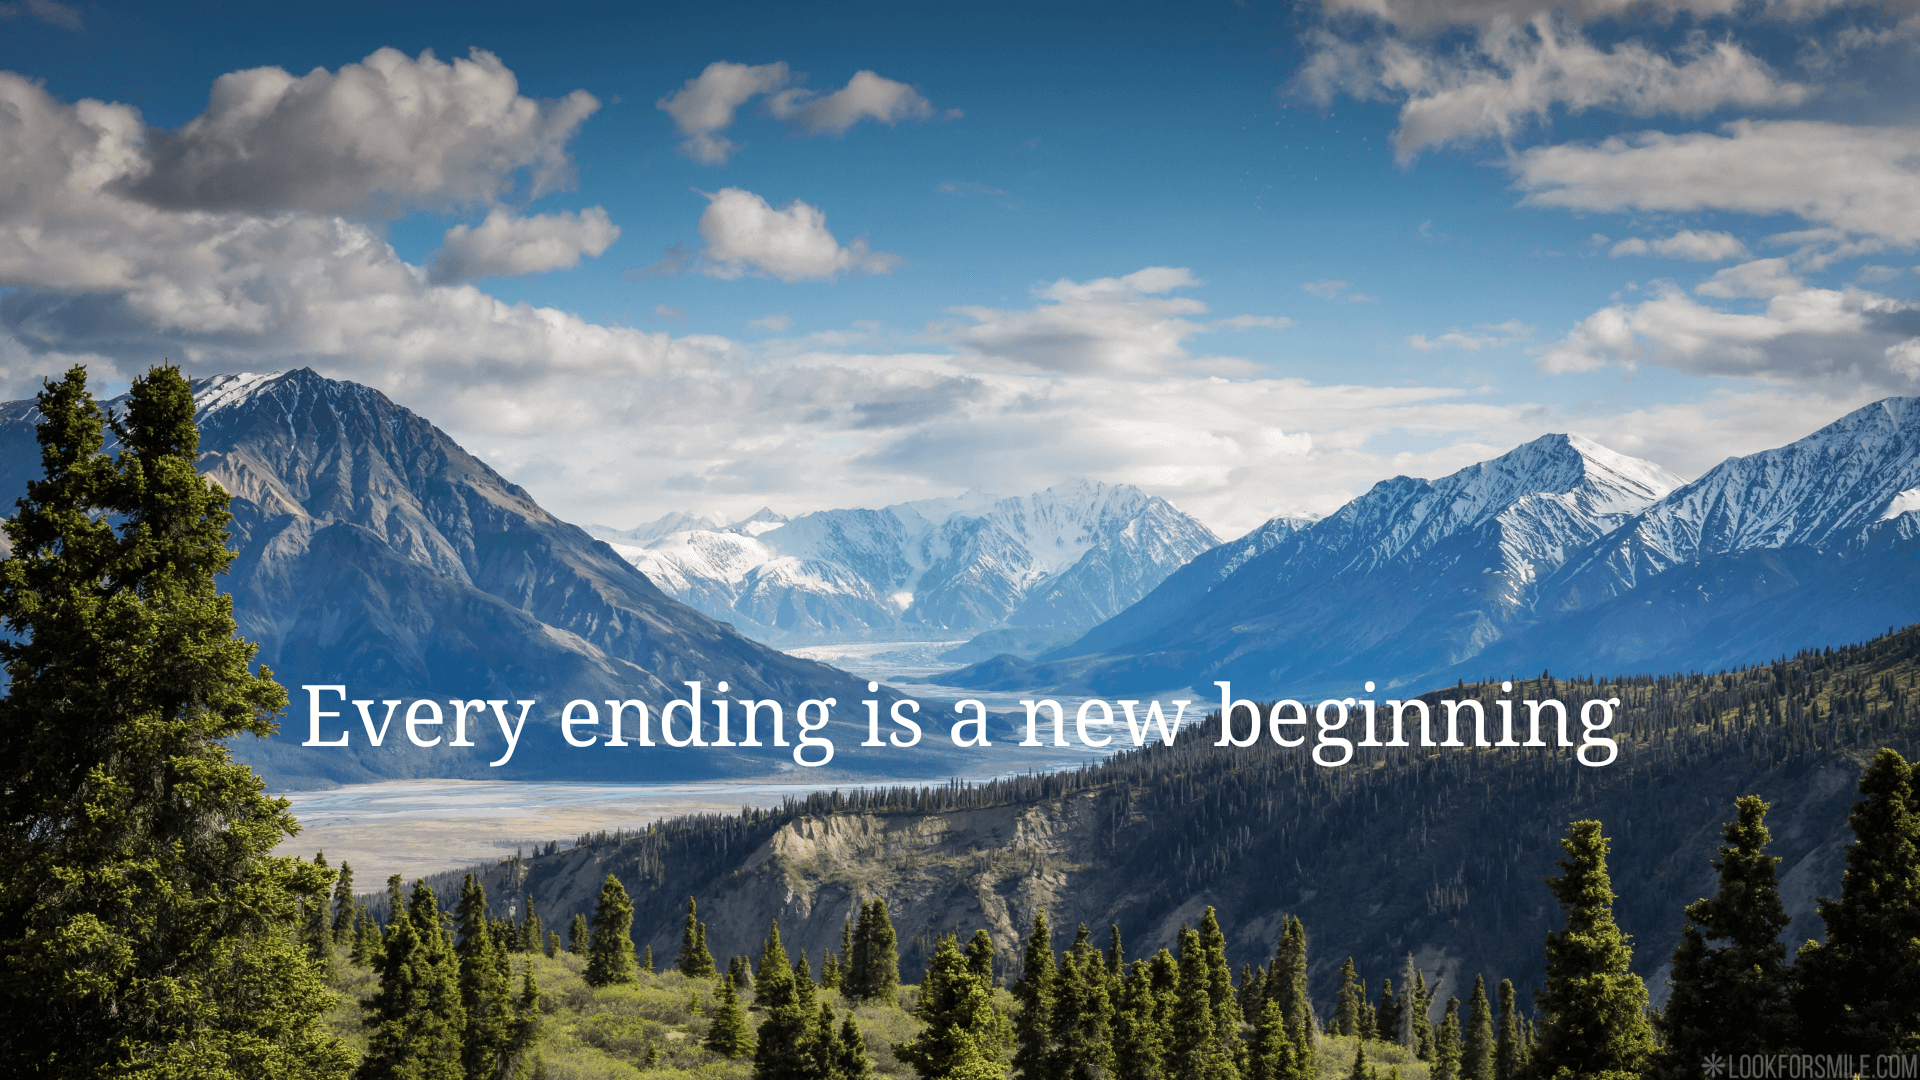 Every ending is a new beginning qoute on picture of mountains – Desktop wallpaper – Lookforsmile.com